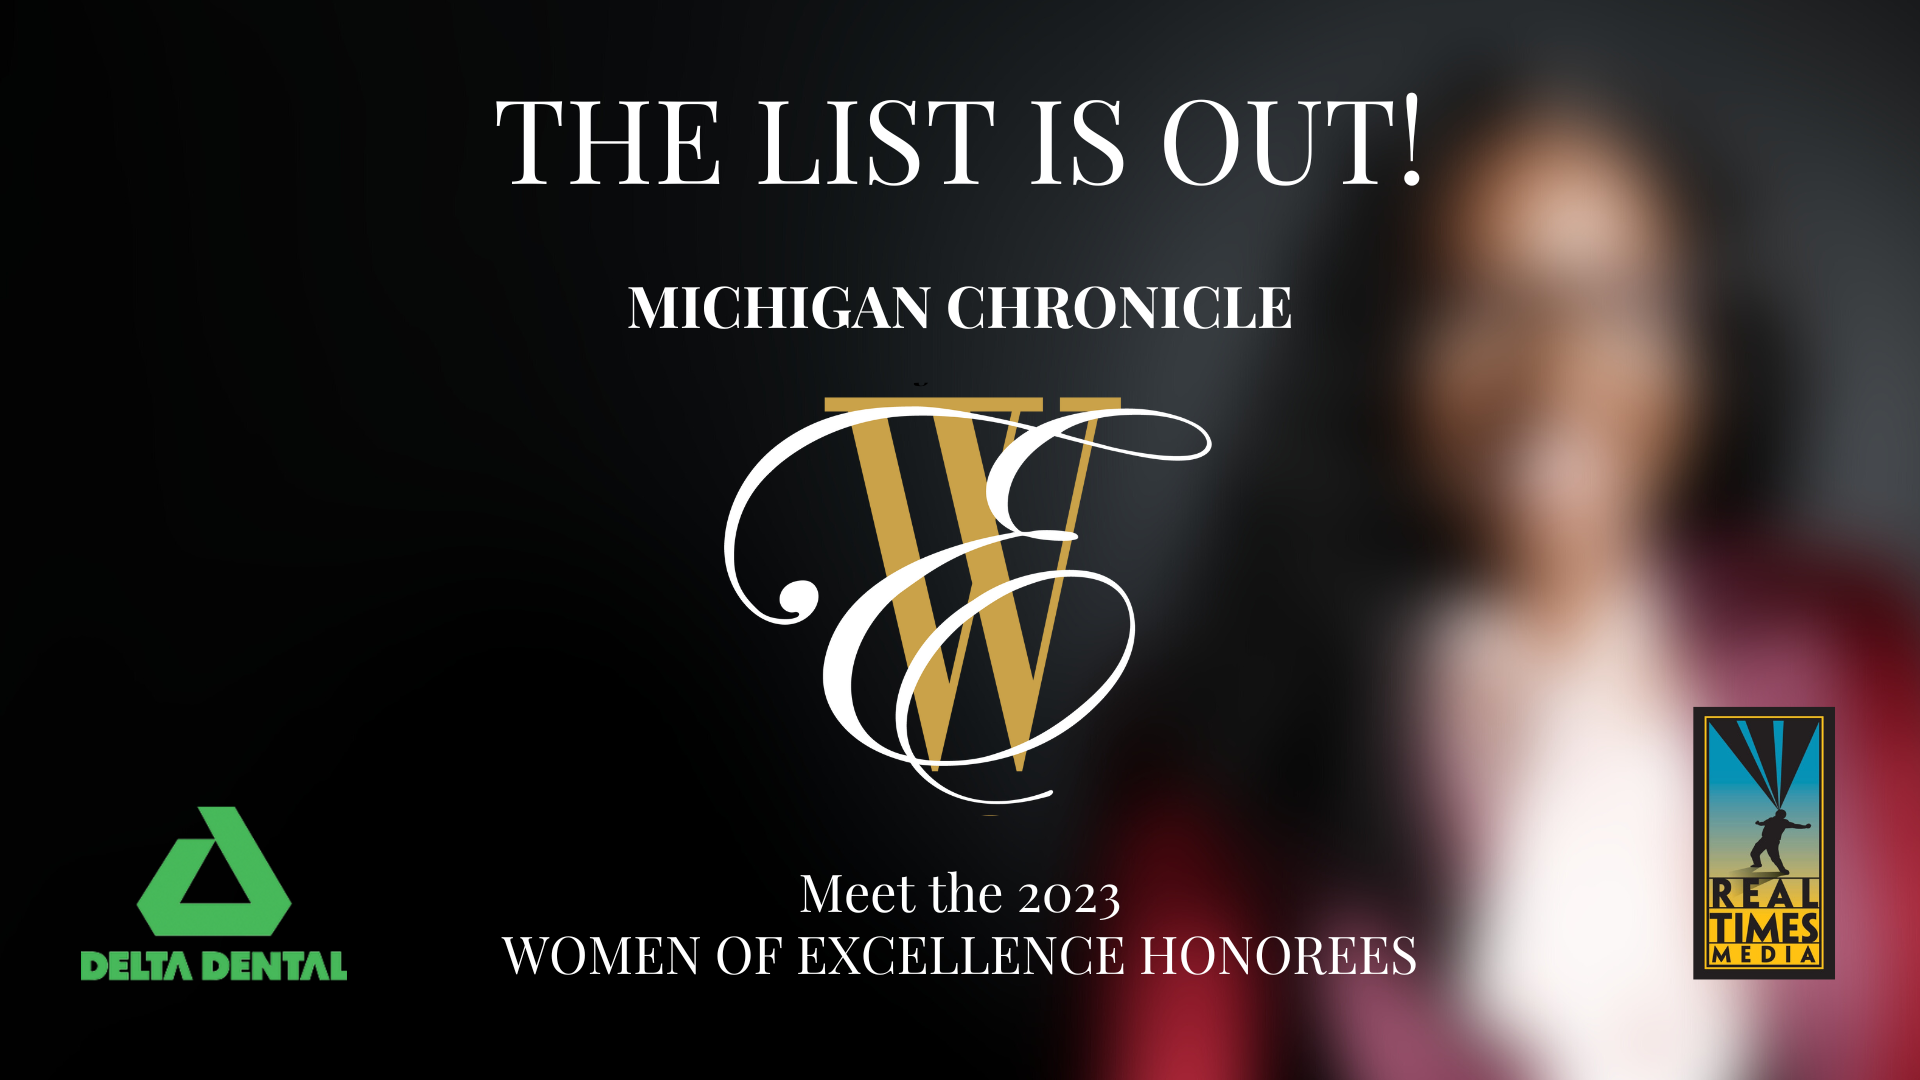 Meet the 2023 Women of Excellence Honorees